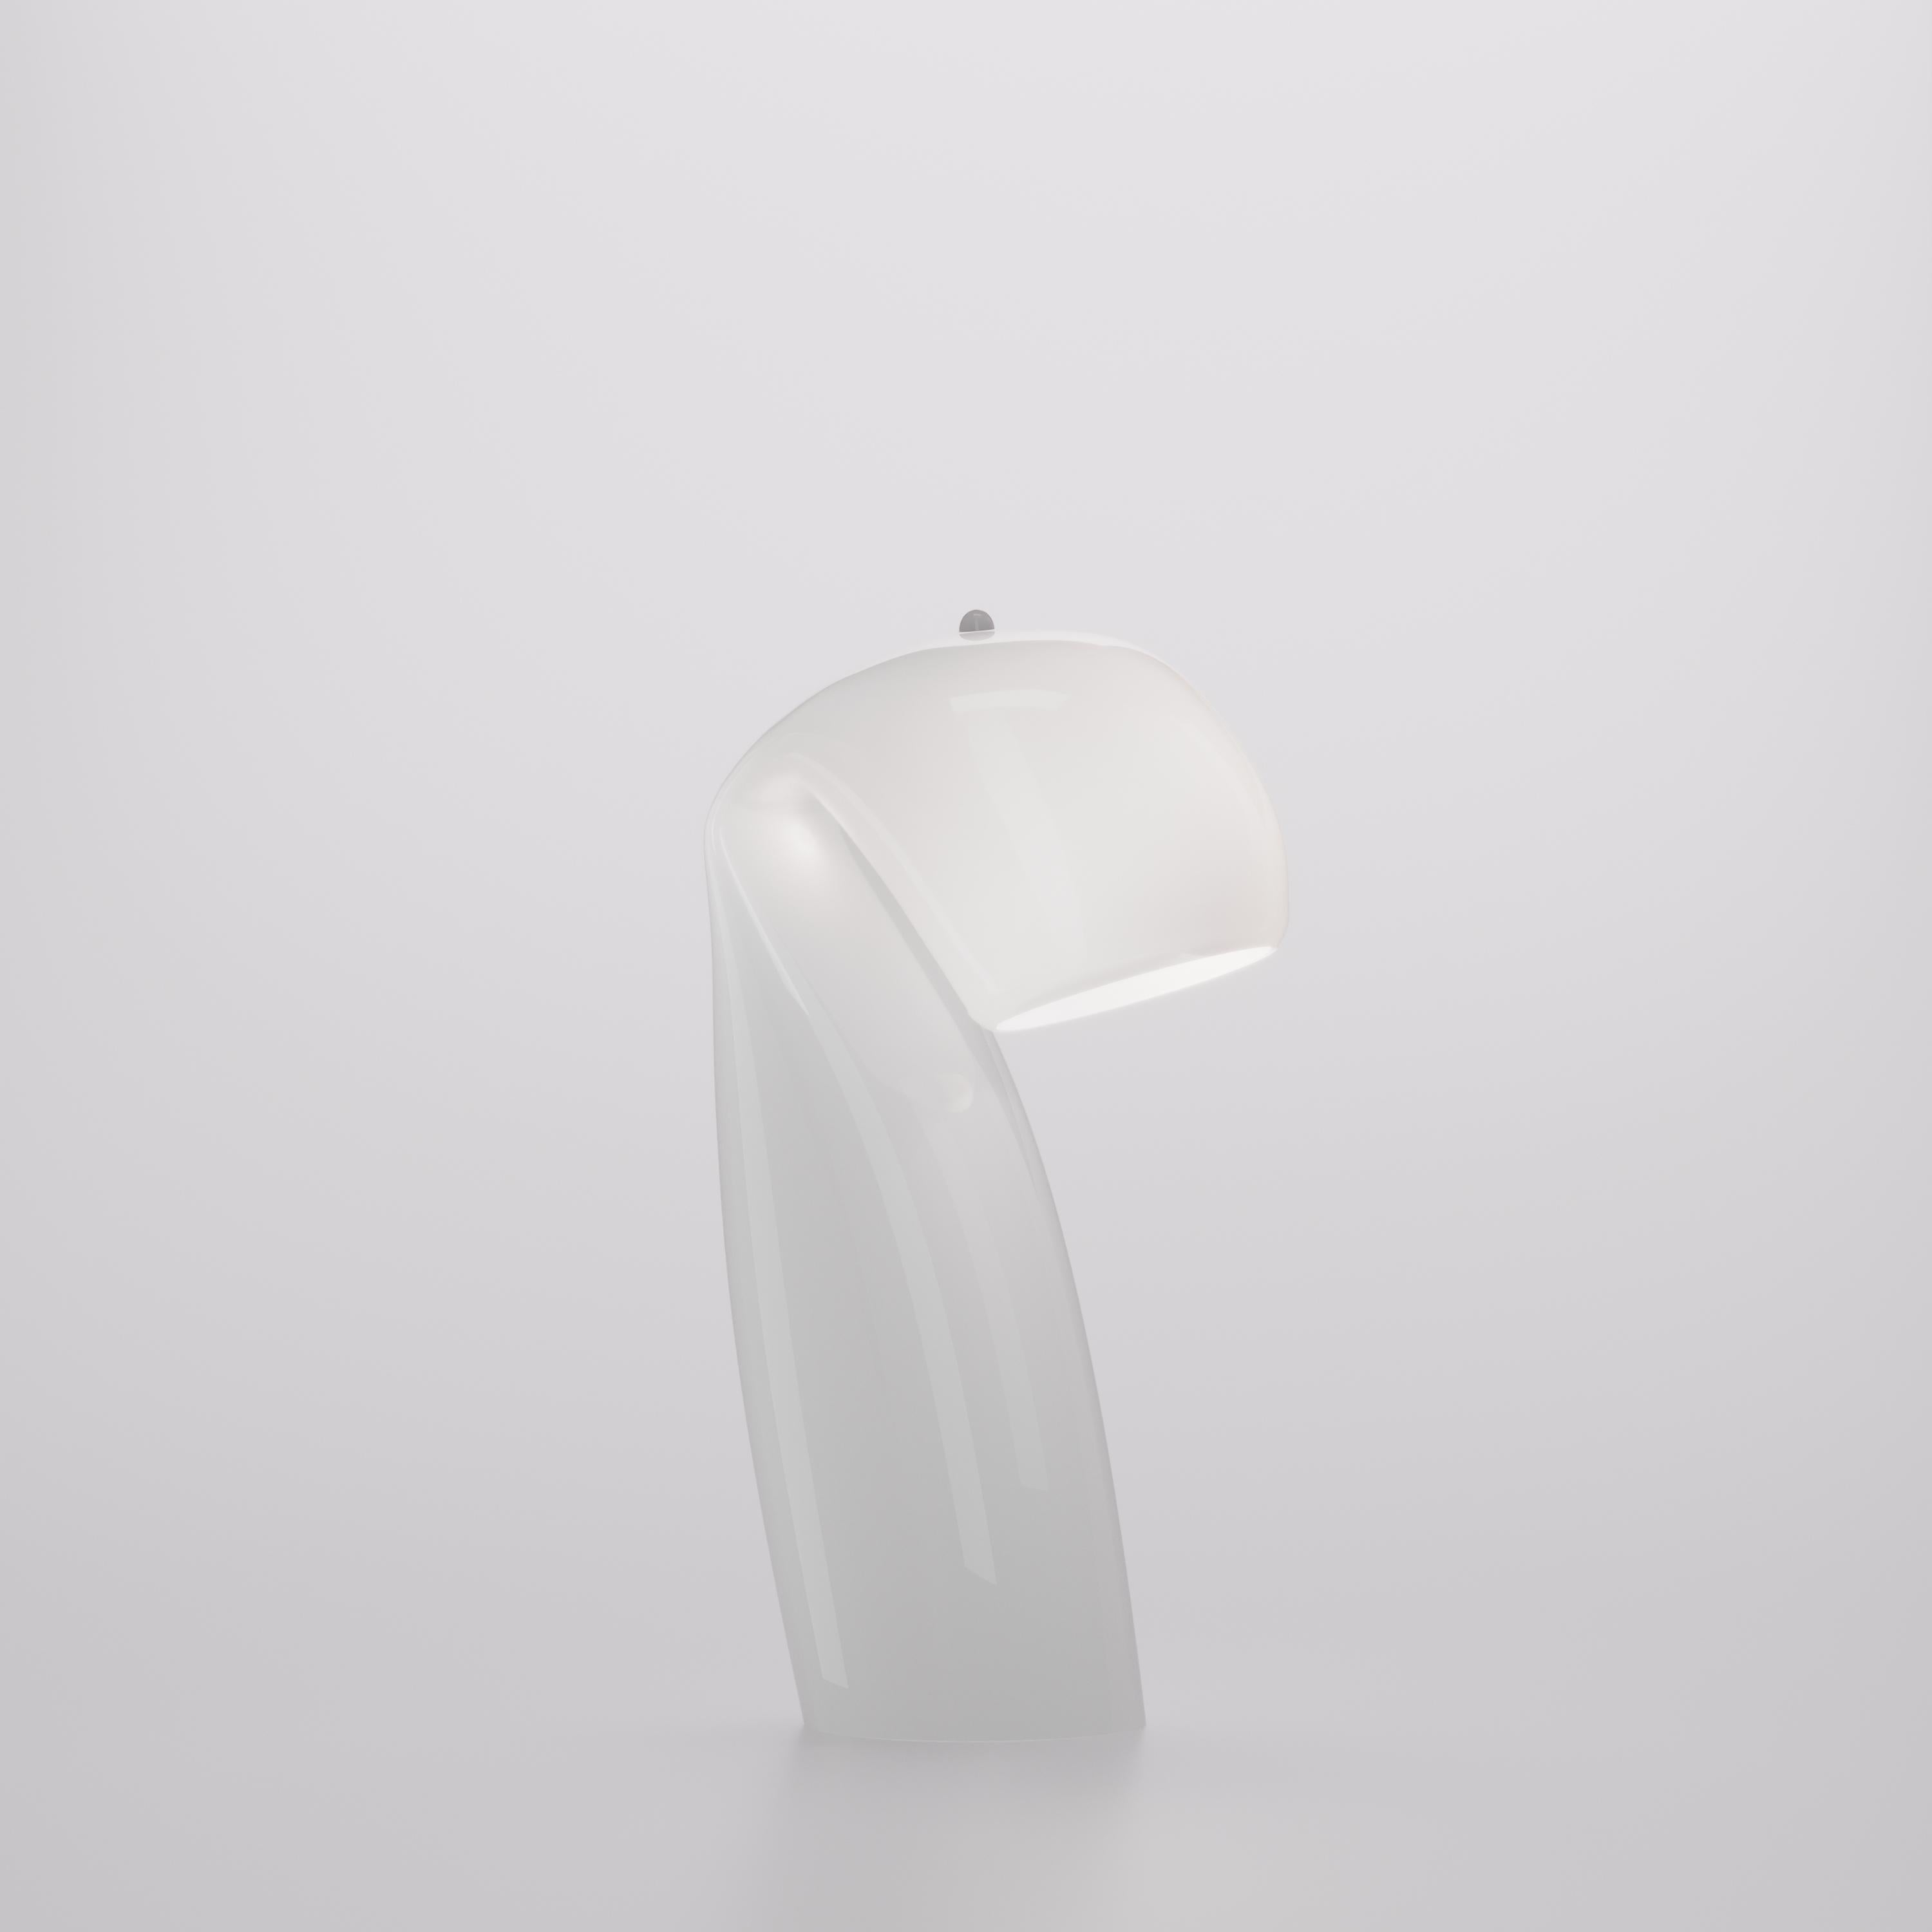 Reflecting the simplicity of vintage design, the Bissa table lamp has high-quality glass and a unique character that complements its handmade production. Glass color tone in glossy white. Metal parts in white. G9 lighting.

 